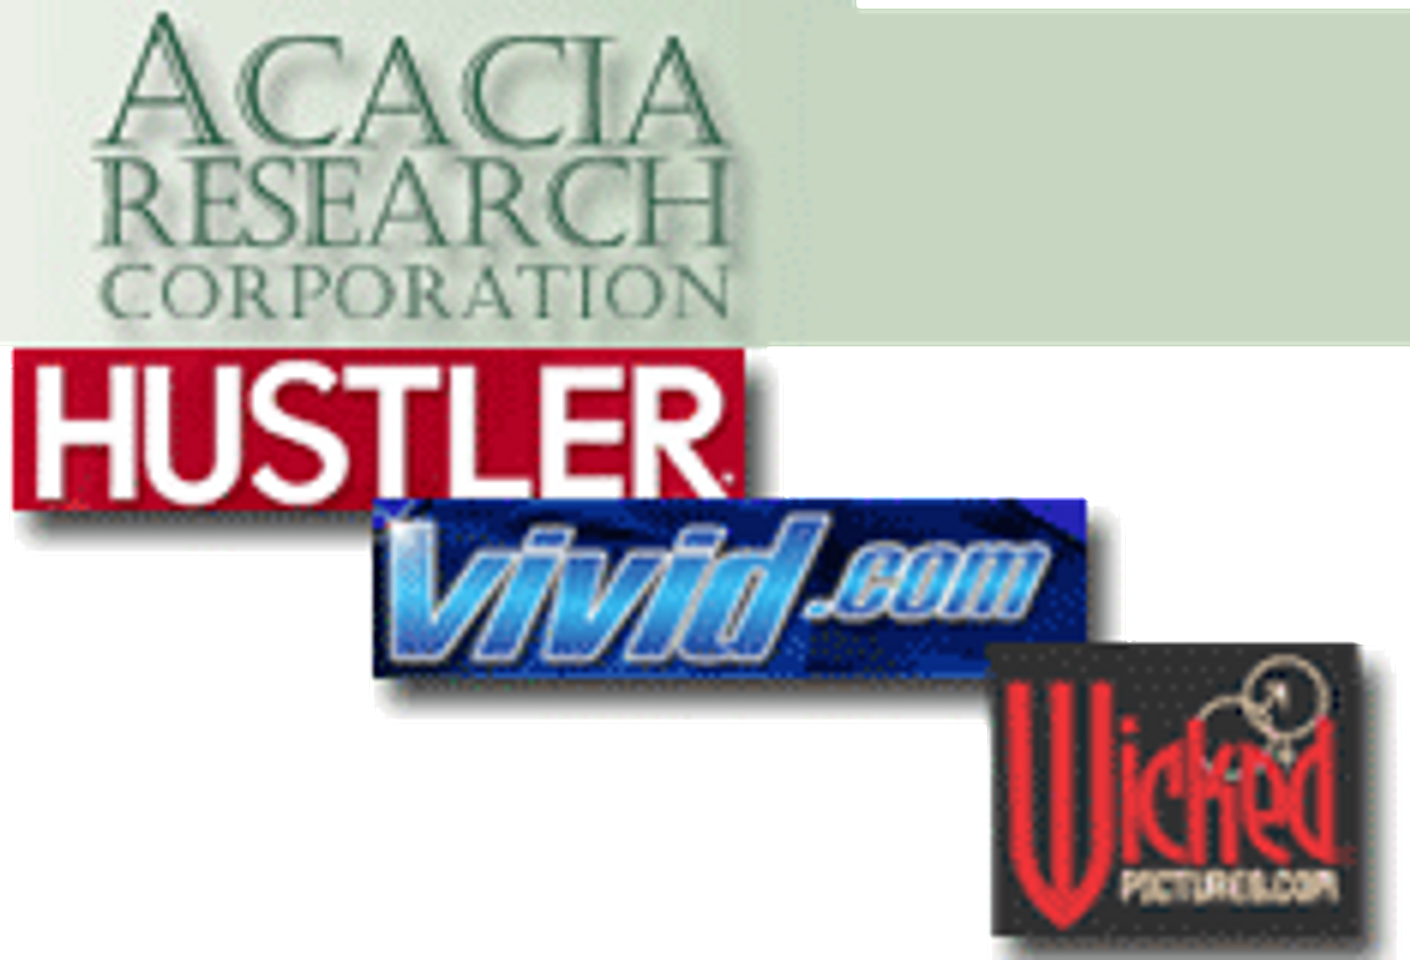 Hustler, Vivid, Wicked Sign Acacia Patent Licenses : UPDATE